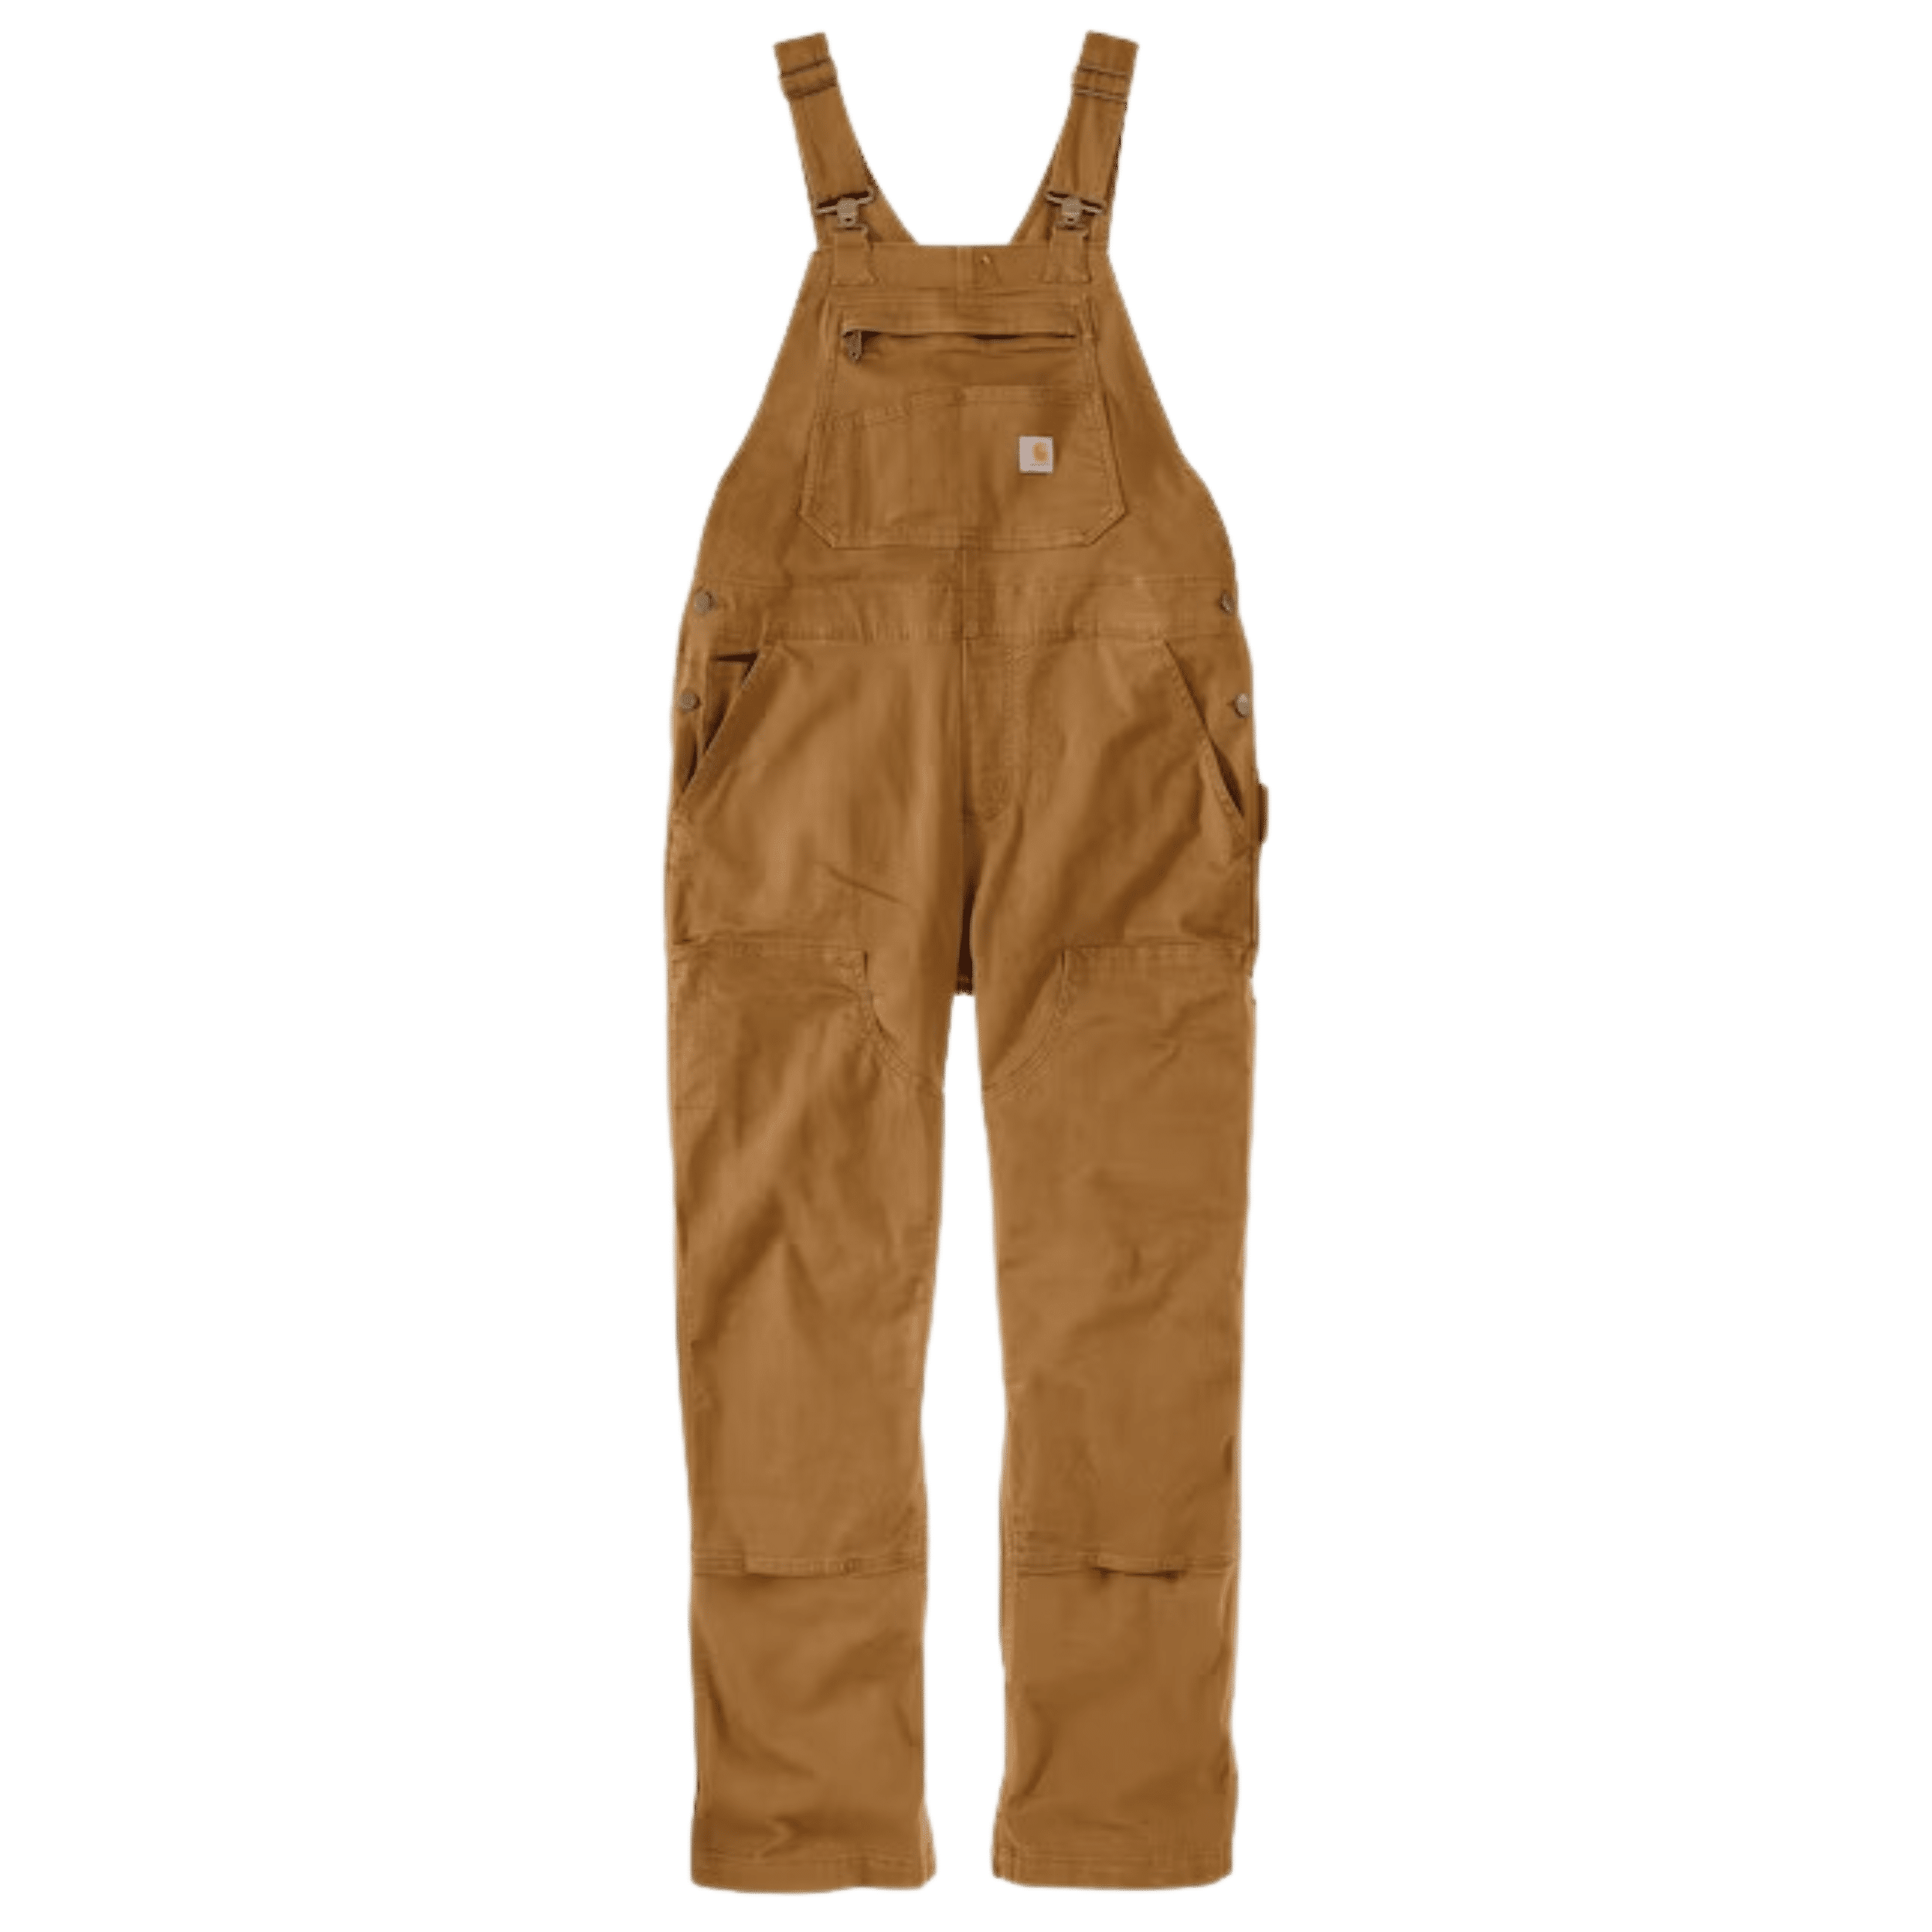 Straight Fit, Duck Double Bib Overalls